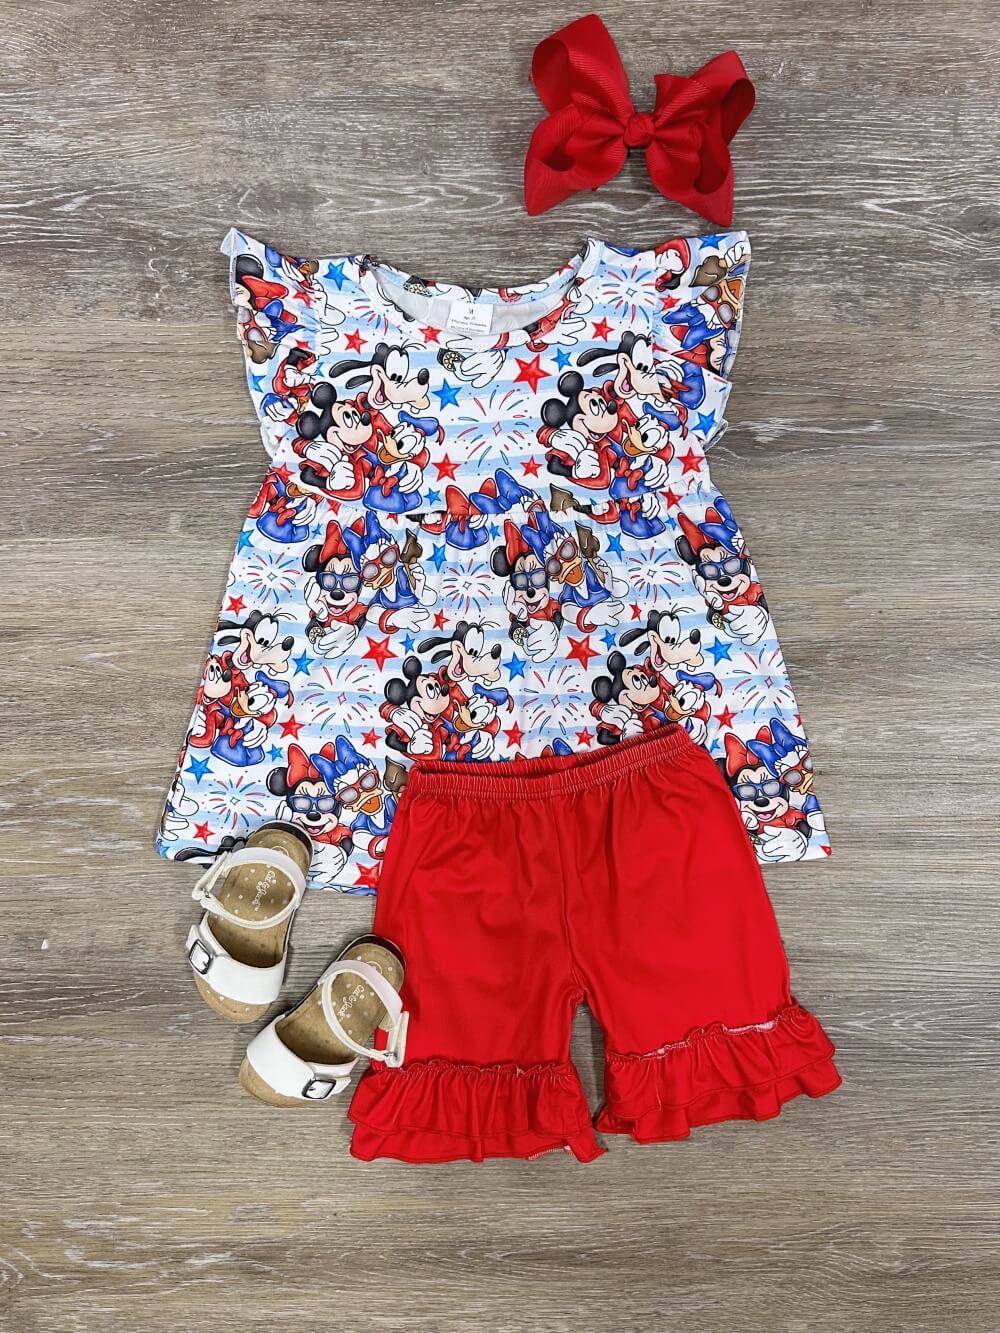 Clubhouse Friends Patriotic Ruffle Girls Shorts Outfit - Sydney So Sweet